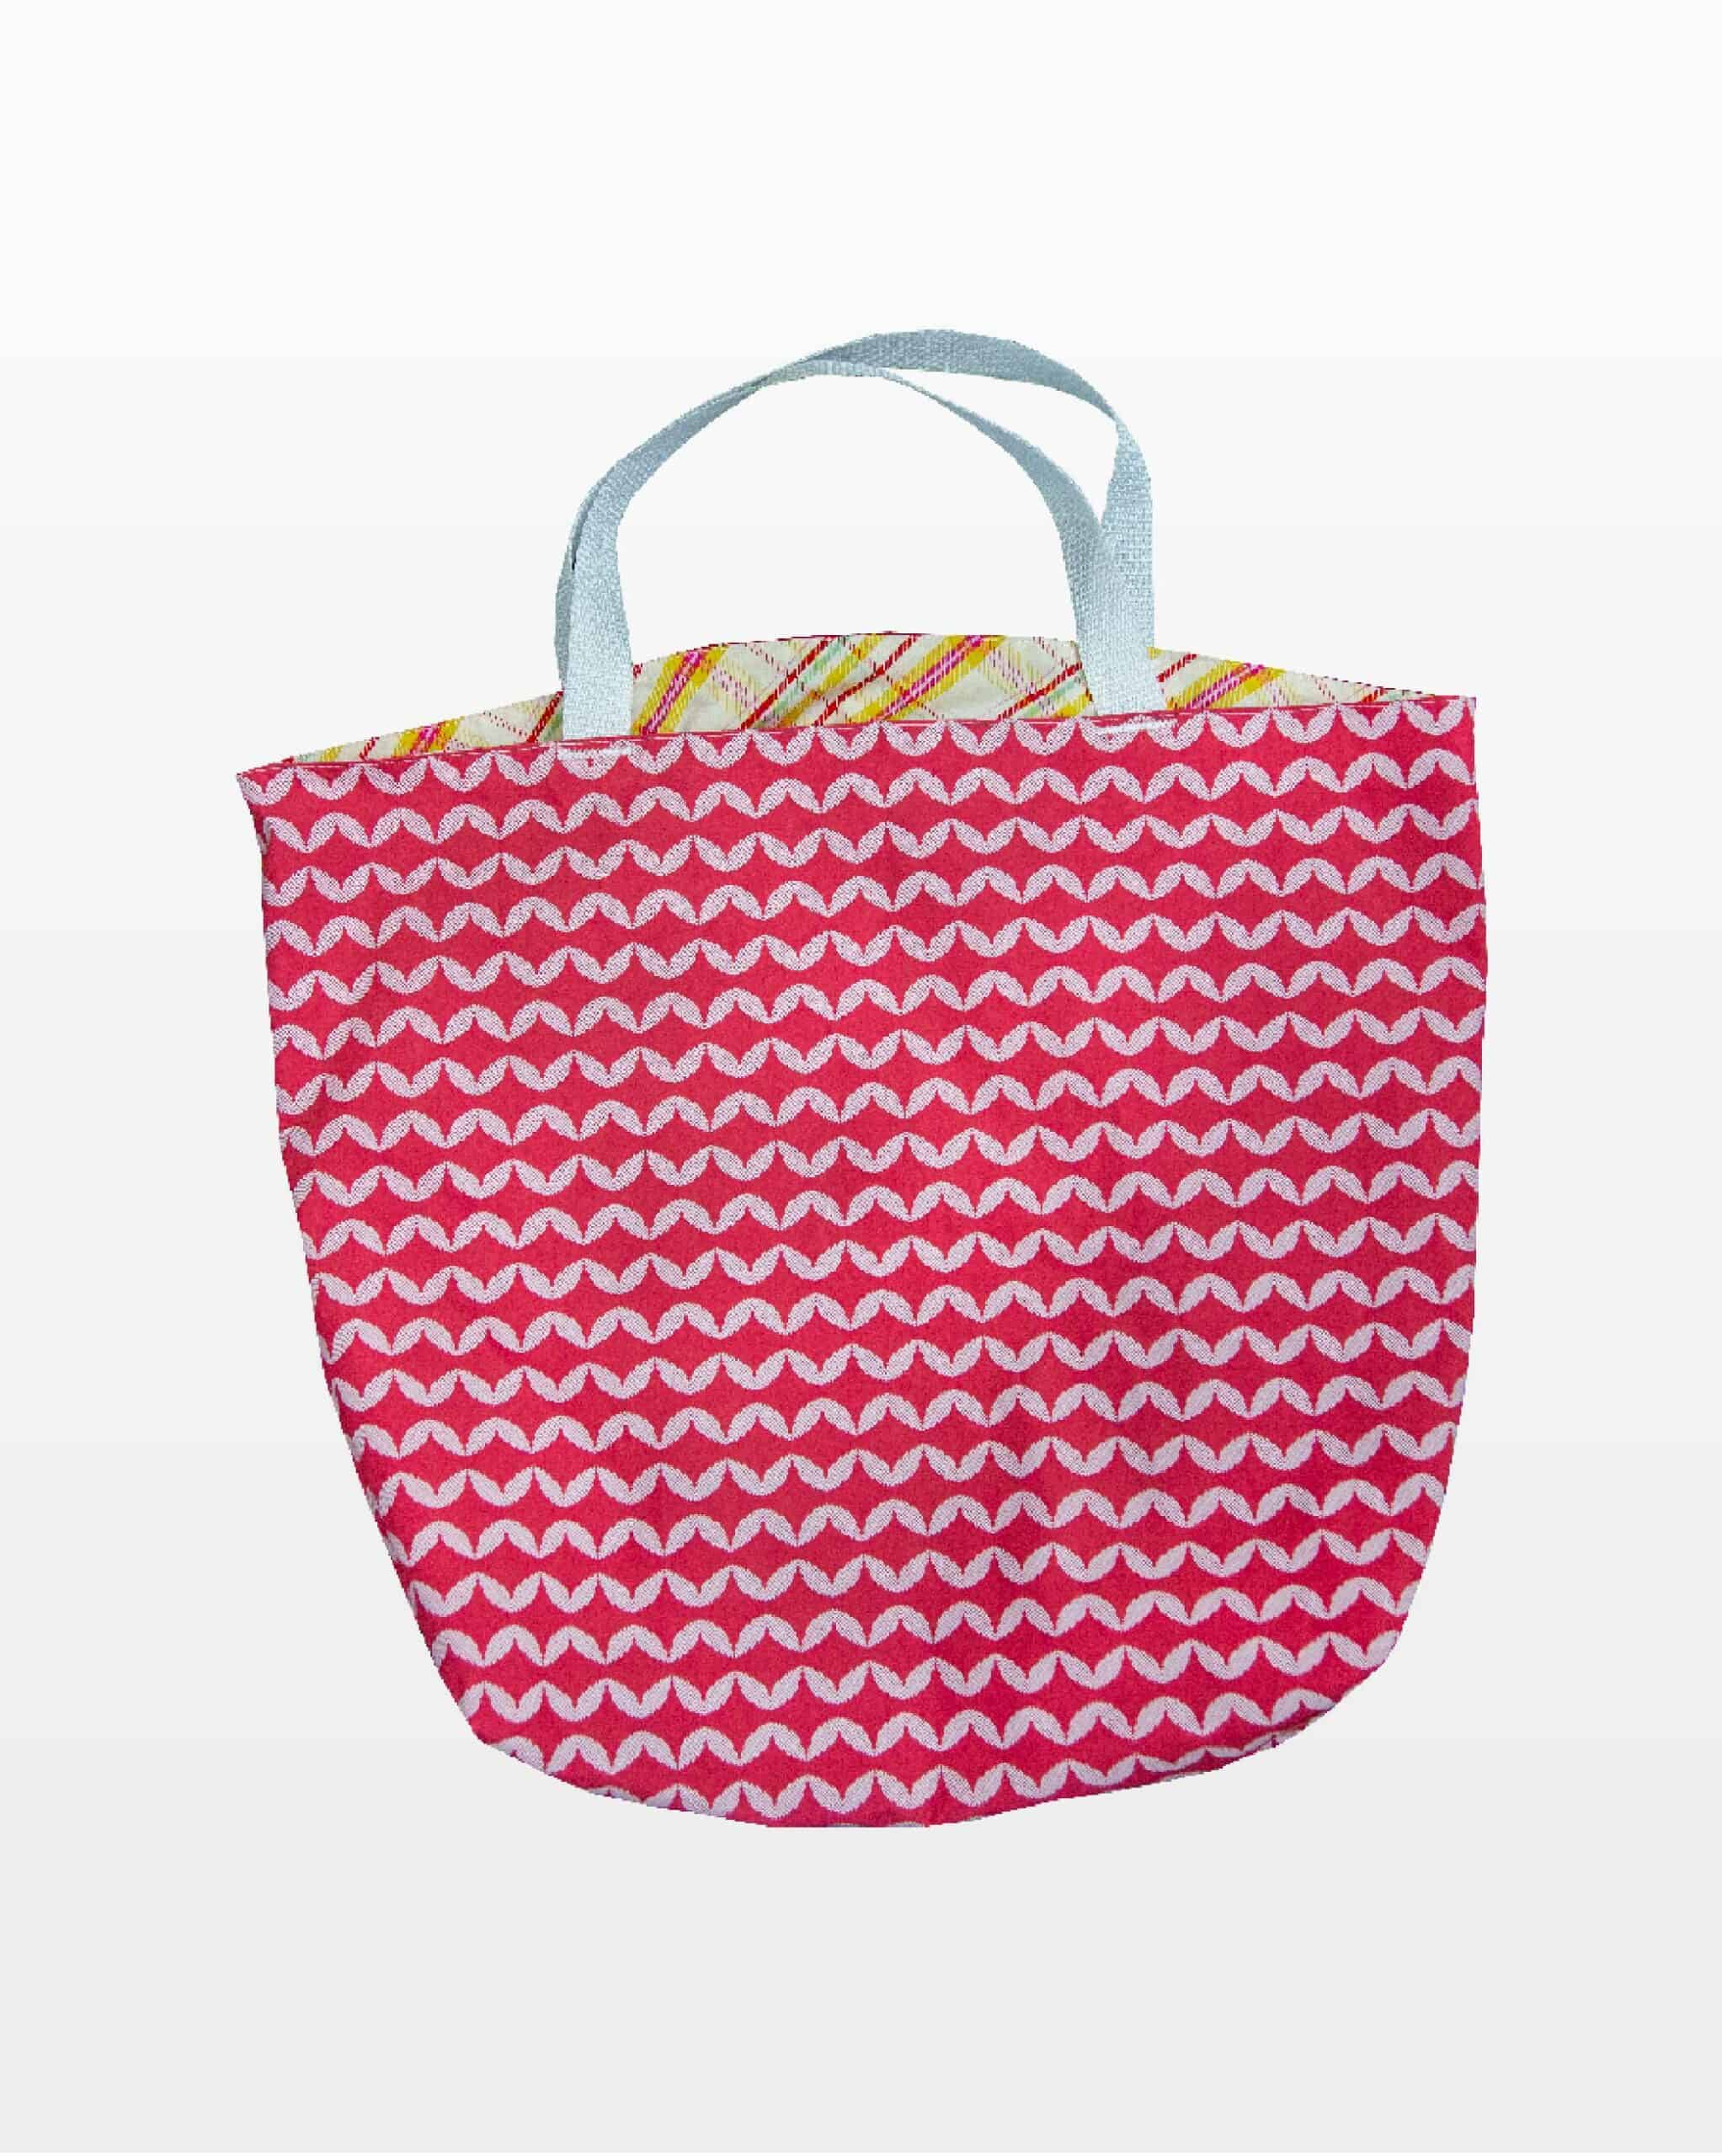 go! fat quarter grocery tote by carolina moore pattern